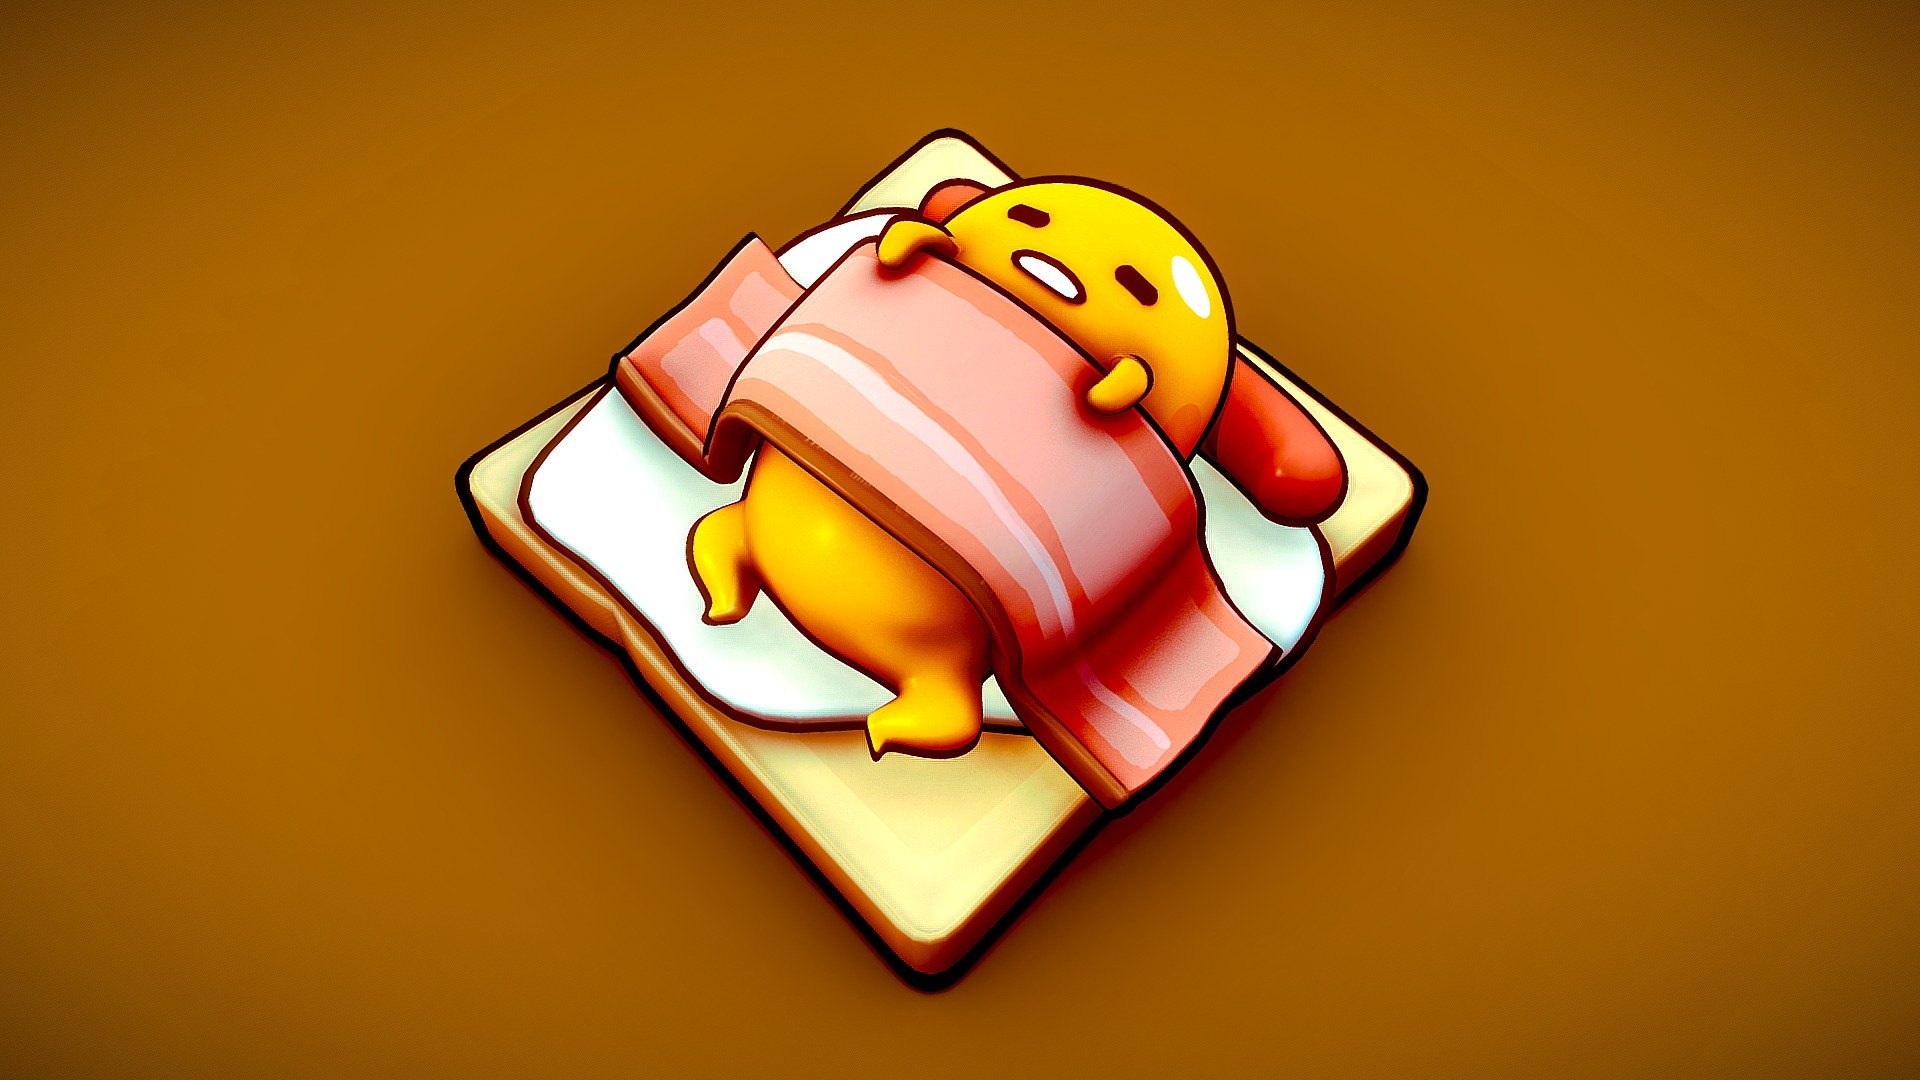 1st monthly challenge of this year.
I speed 3 days to make it. 
Hope you guys like it!! - Gudetama Sleeping zzZ.. 3d model